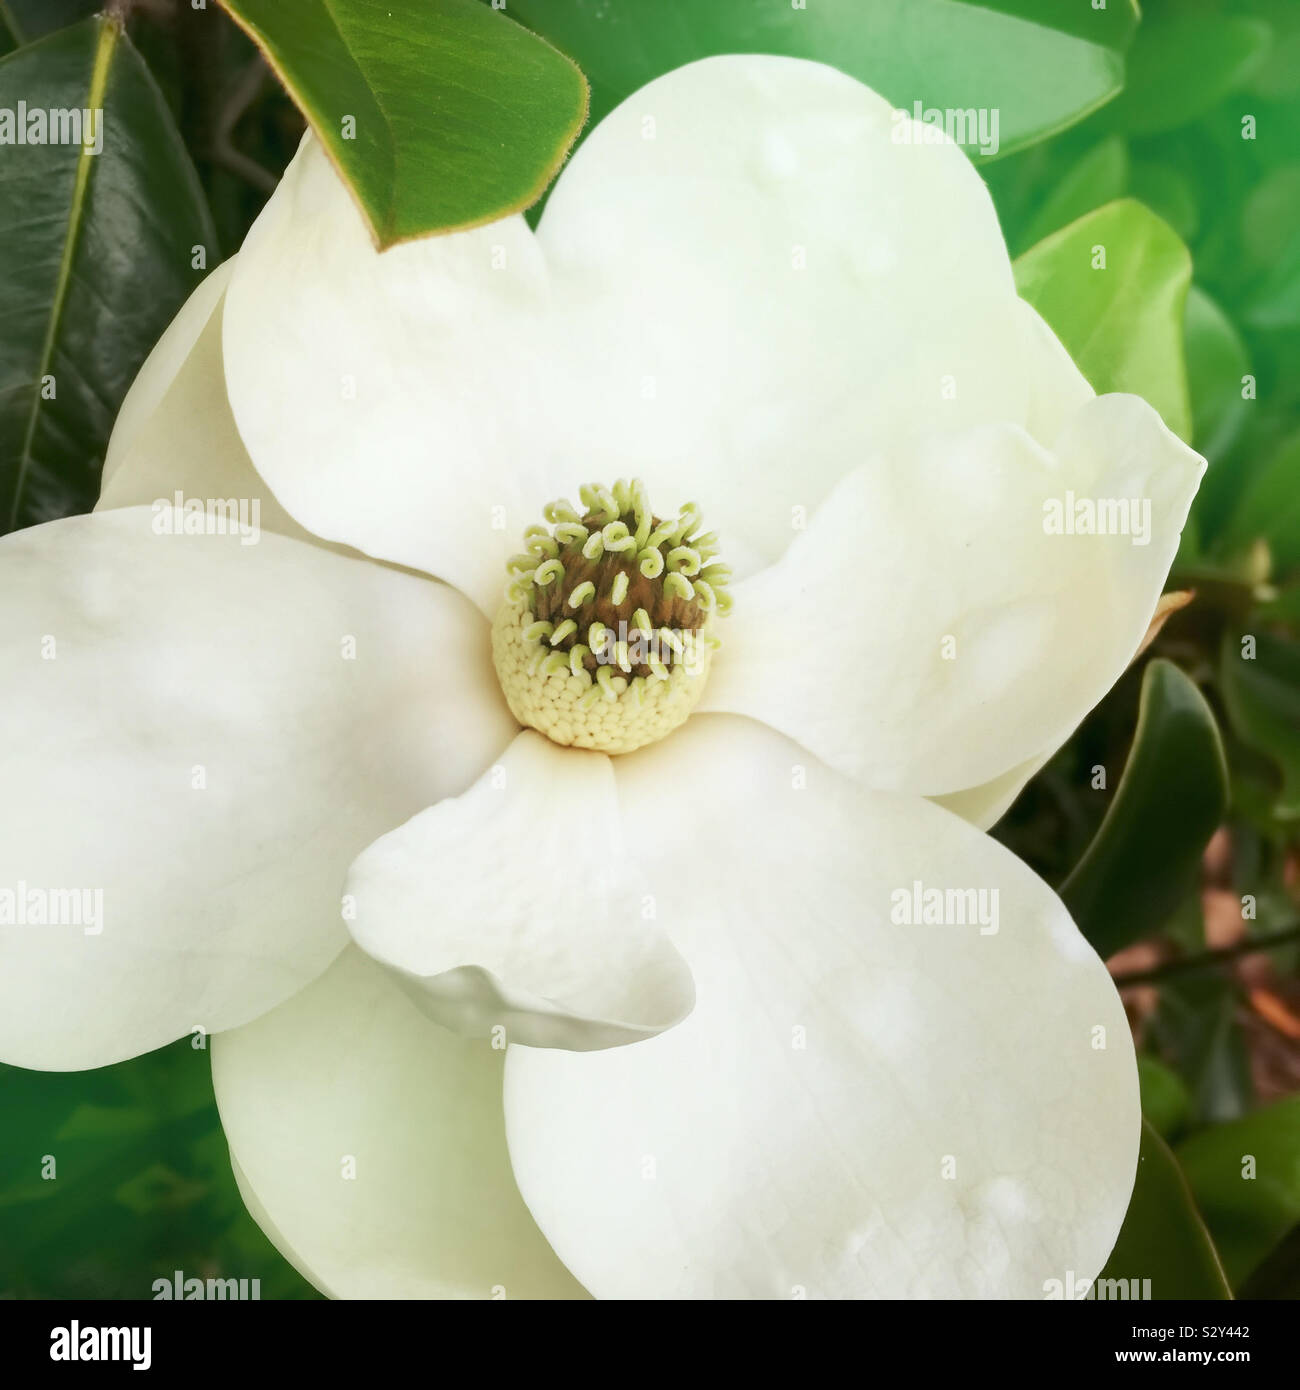 A southern magnolia tree with a close up of a flower in bloom. The cone like cluster shows the carpel and its unique curls. Stock Photo